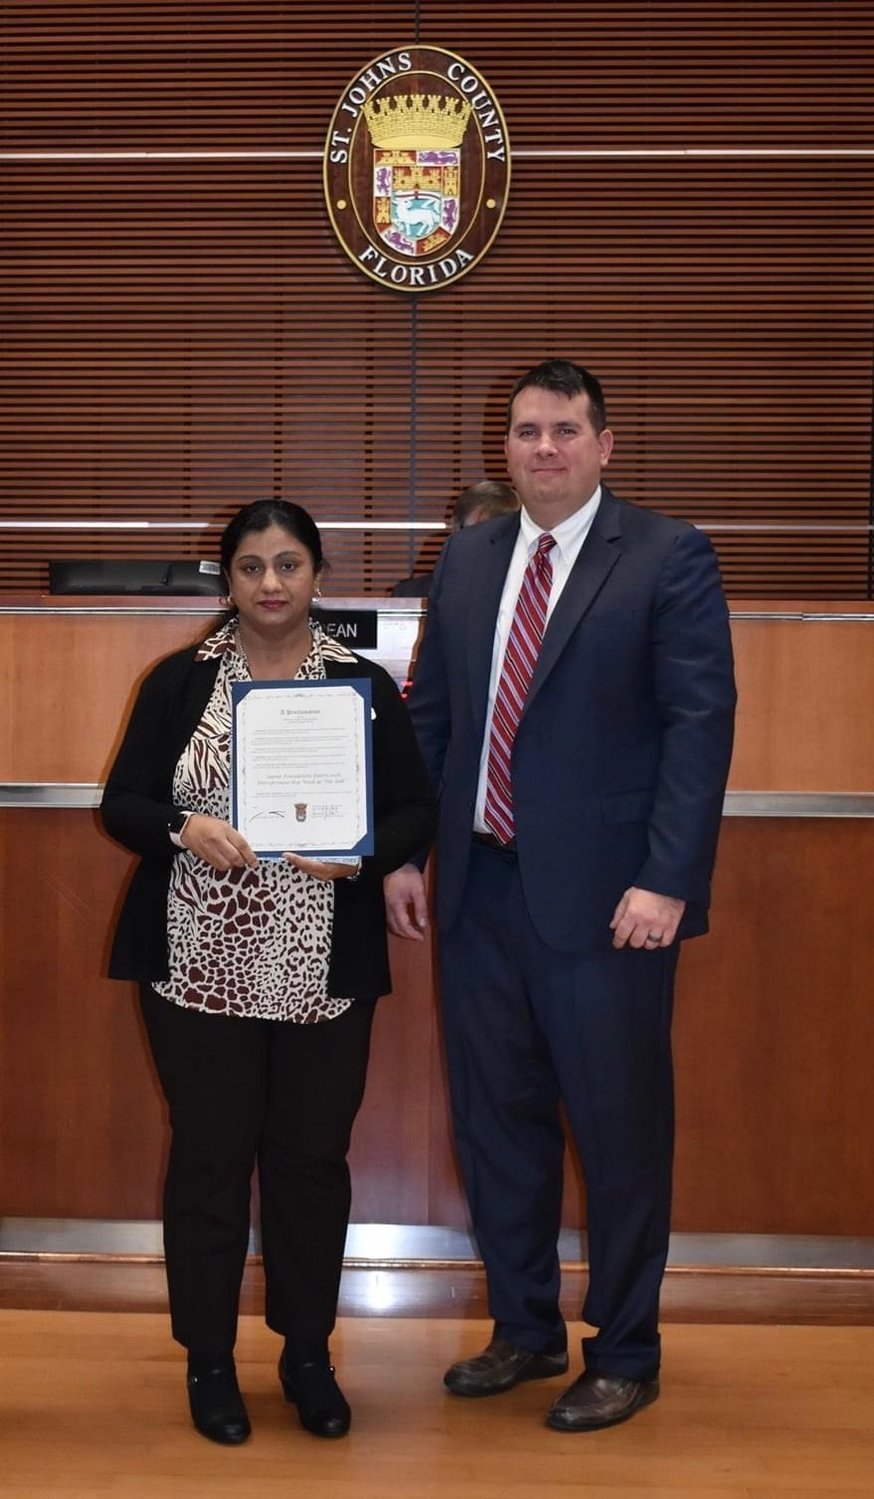 County Commissioner Jeremiah Blocker presents a proclamation to Gurpreet Misra recognizing Entrepreneurial Week.